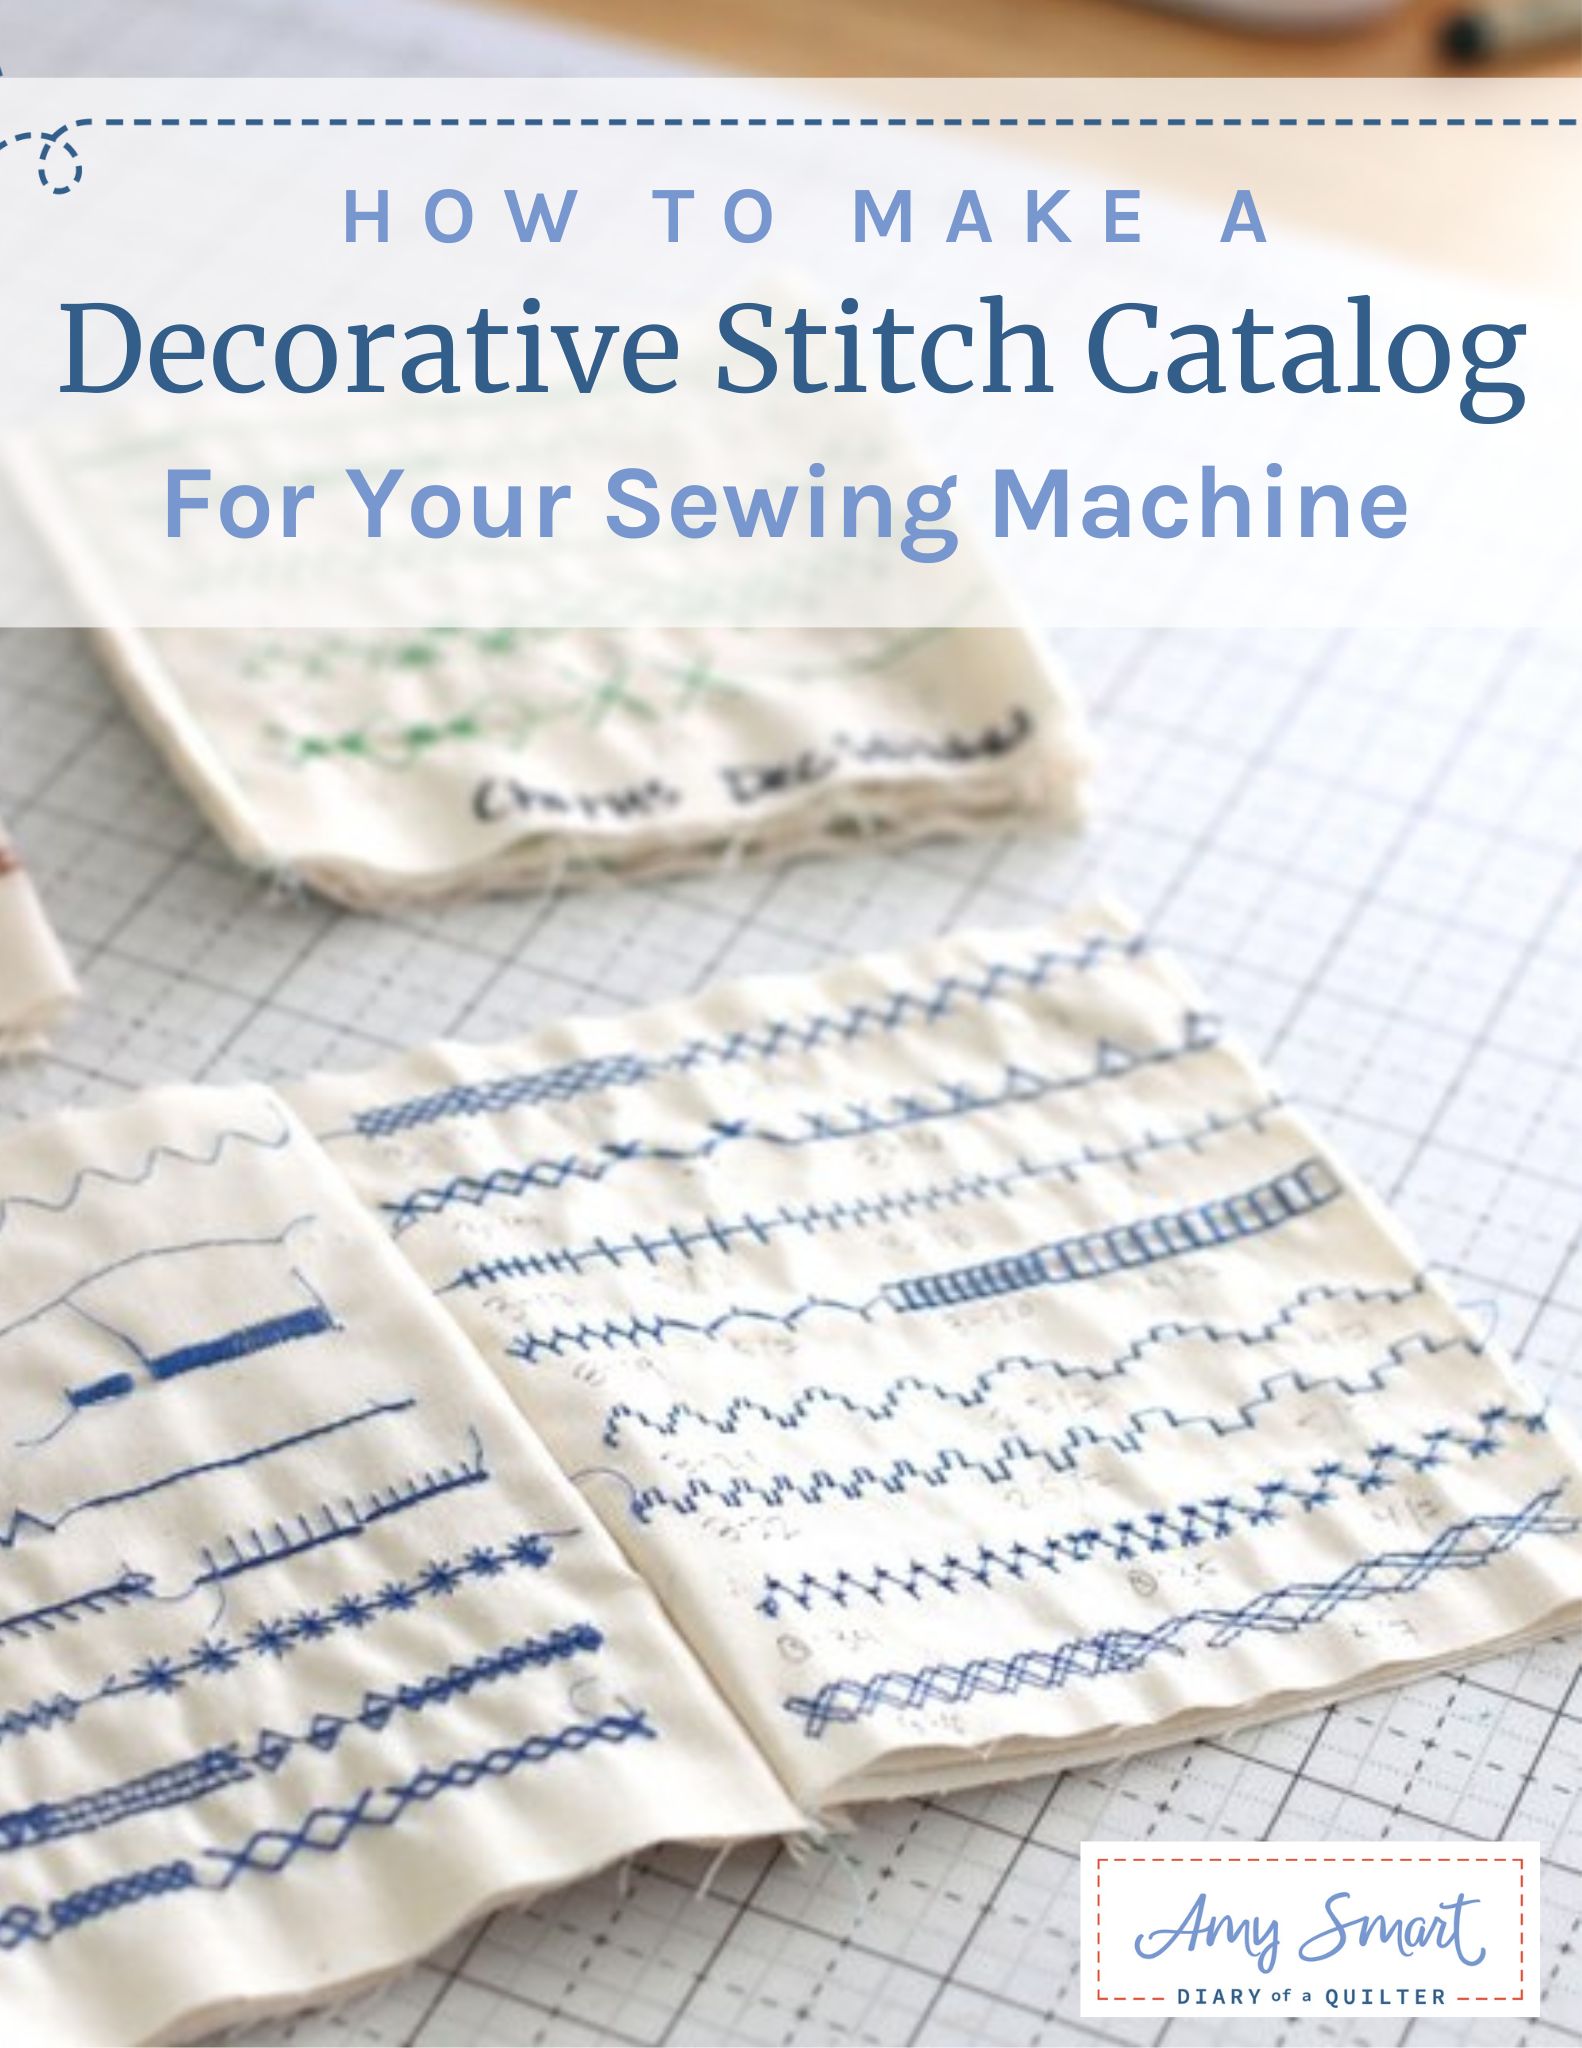 What are the 3 MUST-HAVE SEWING BOOKS that will actually help on your  sewing journey? Plus my favs! 